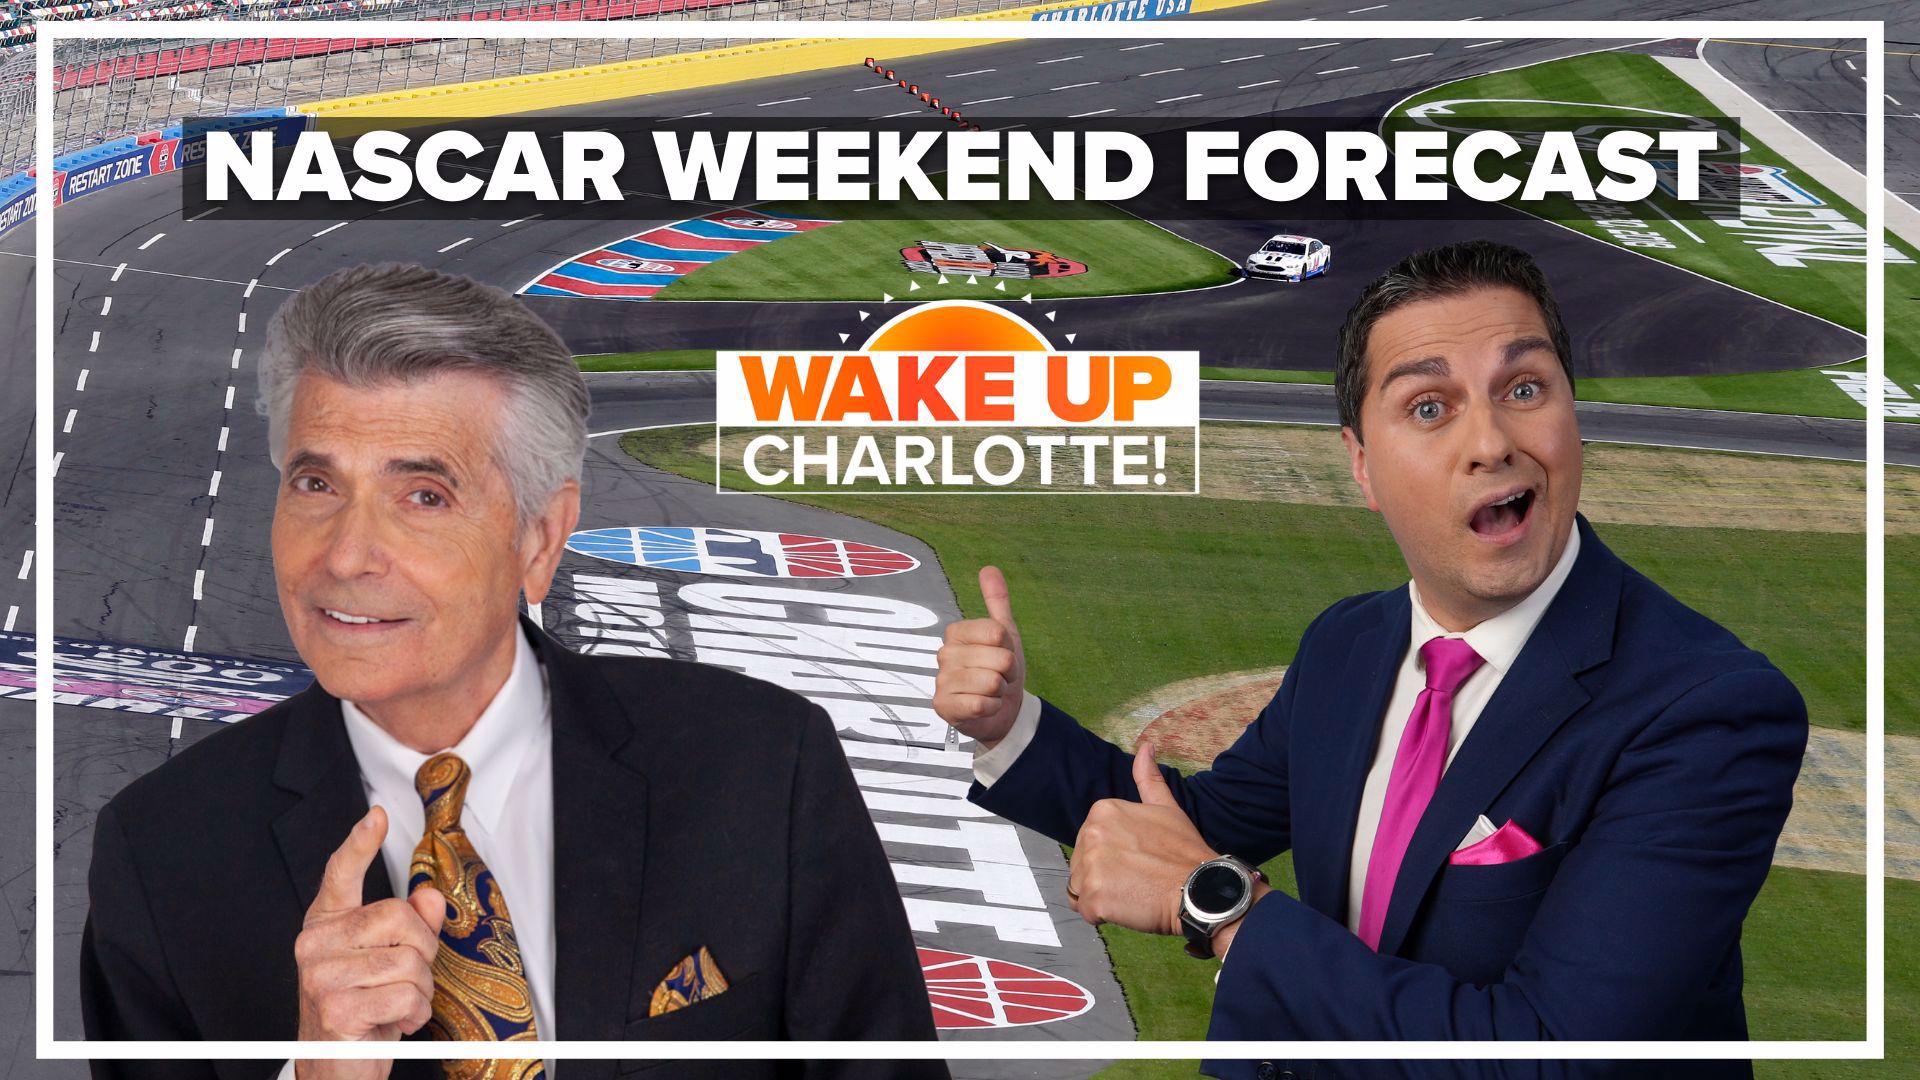 It's going to be a cool and sunny weekend for NASCAR at Charlotte Motor Speedway! Larry Sprinkle and Chris Mulcahy have the full forecast on #WakeUpCLT To Go!